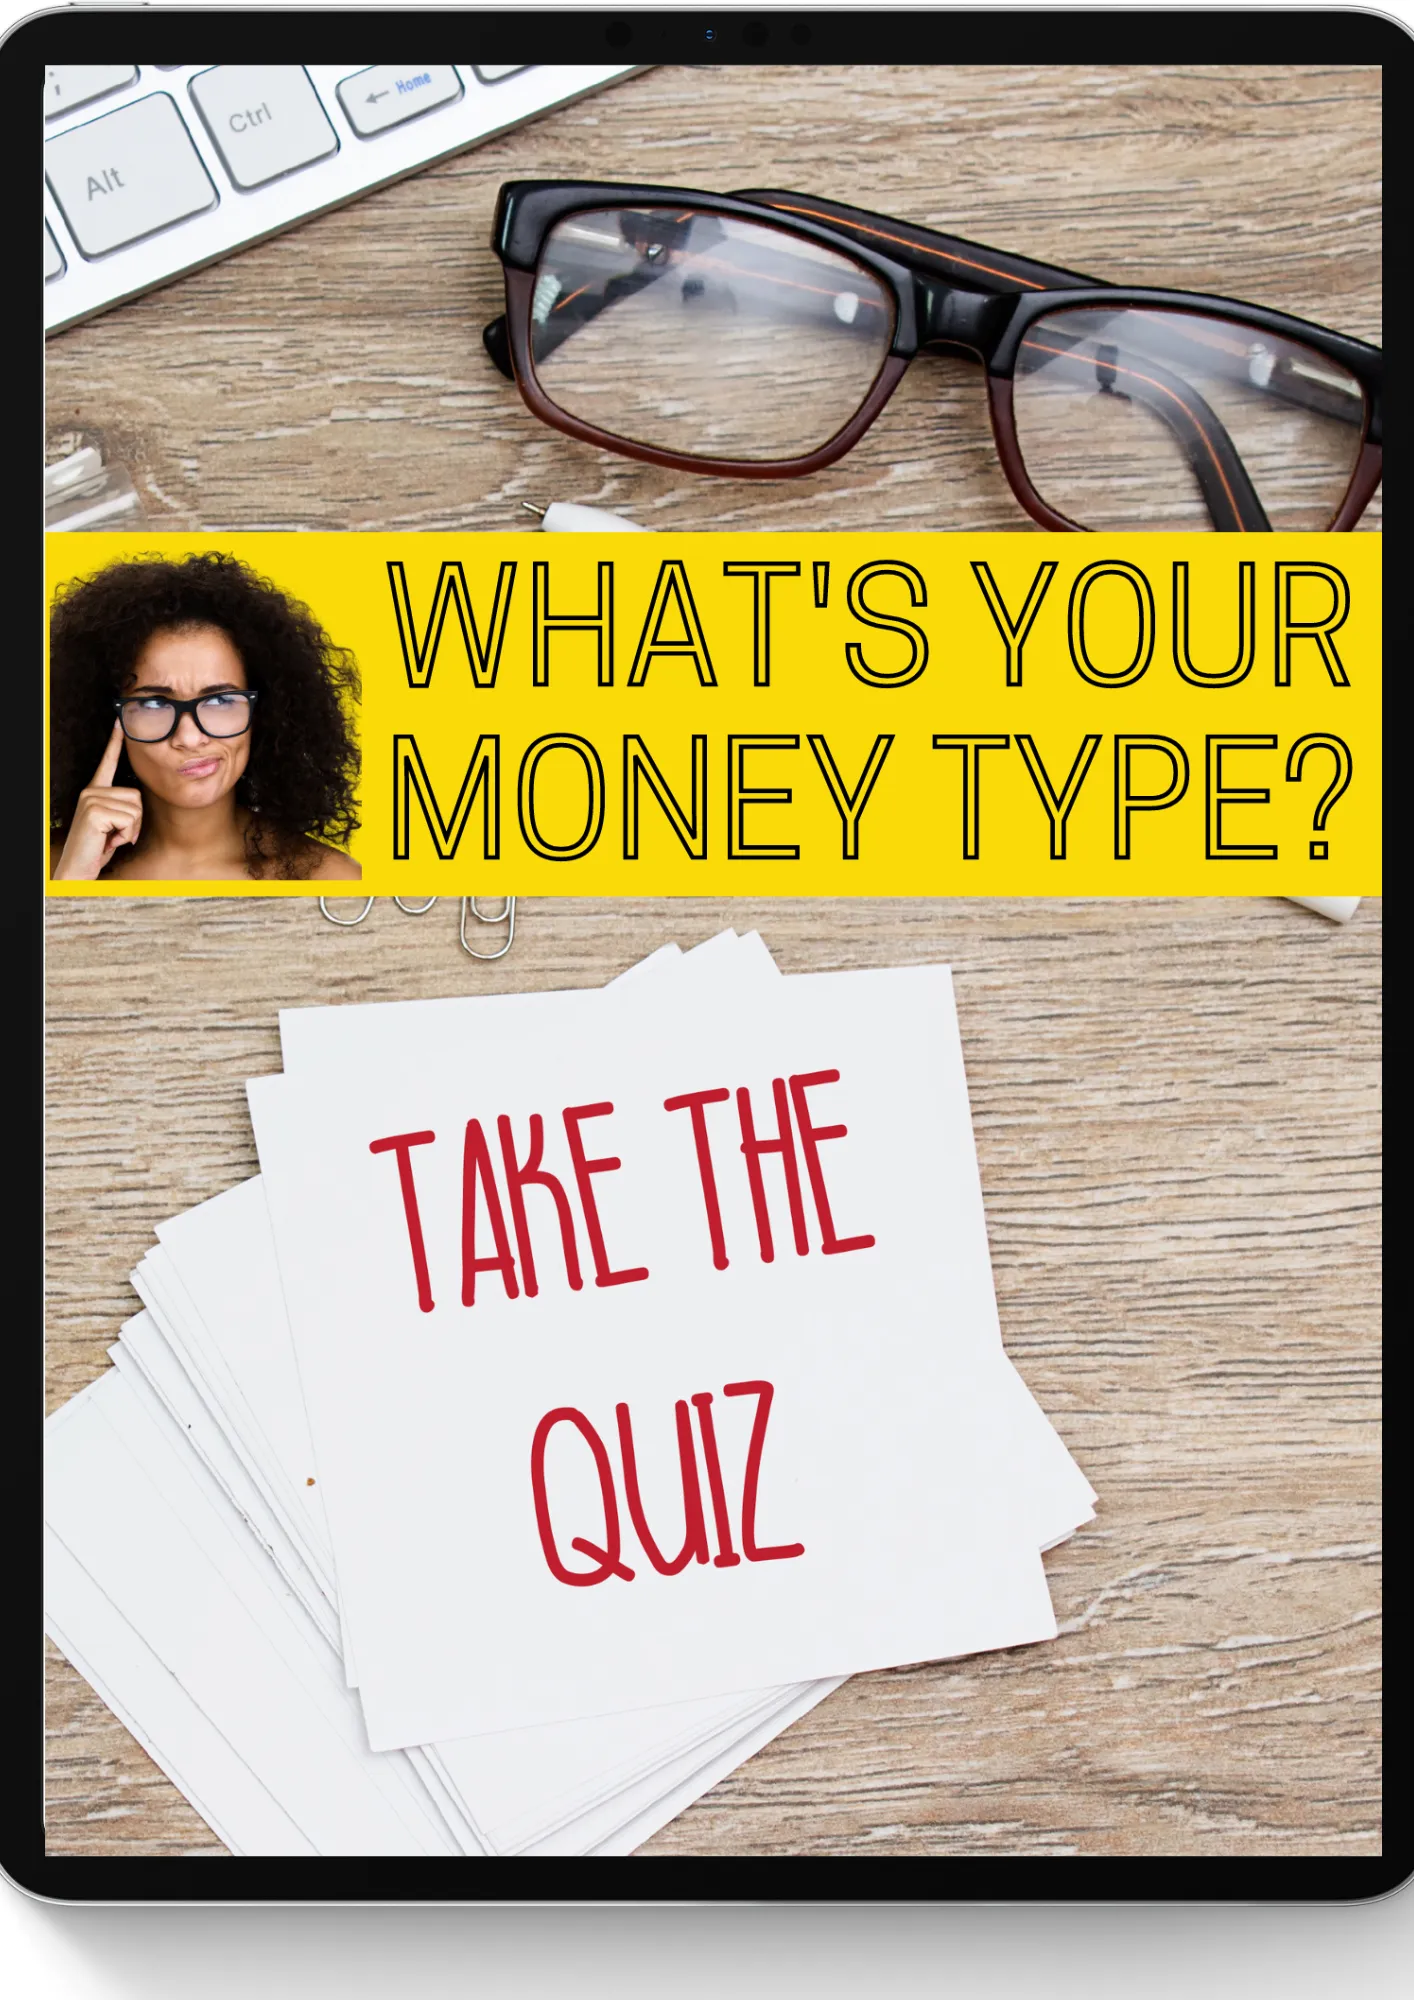 What's your Money type?